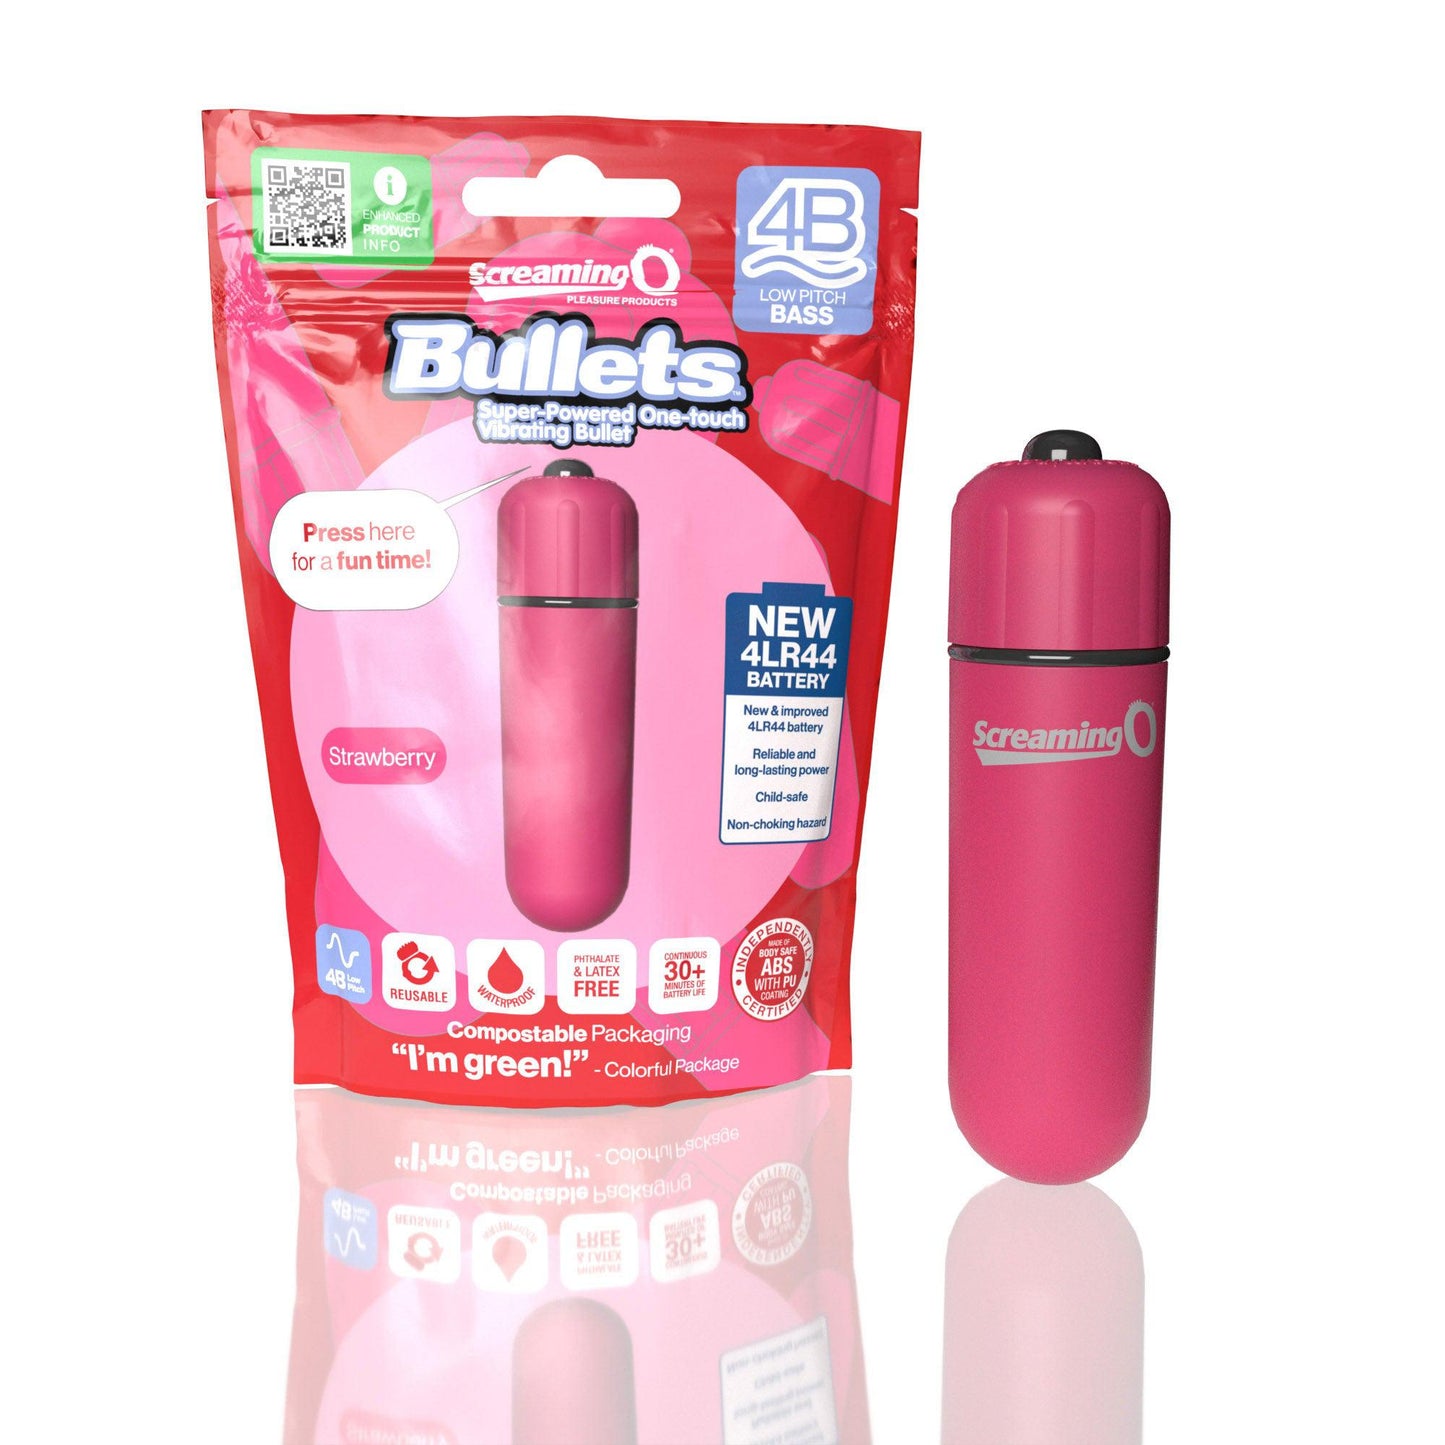 Screaming O 4b - Bullet - Super Powered One Touch  Vibrating Bullet - Strawberry